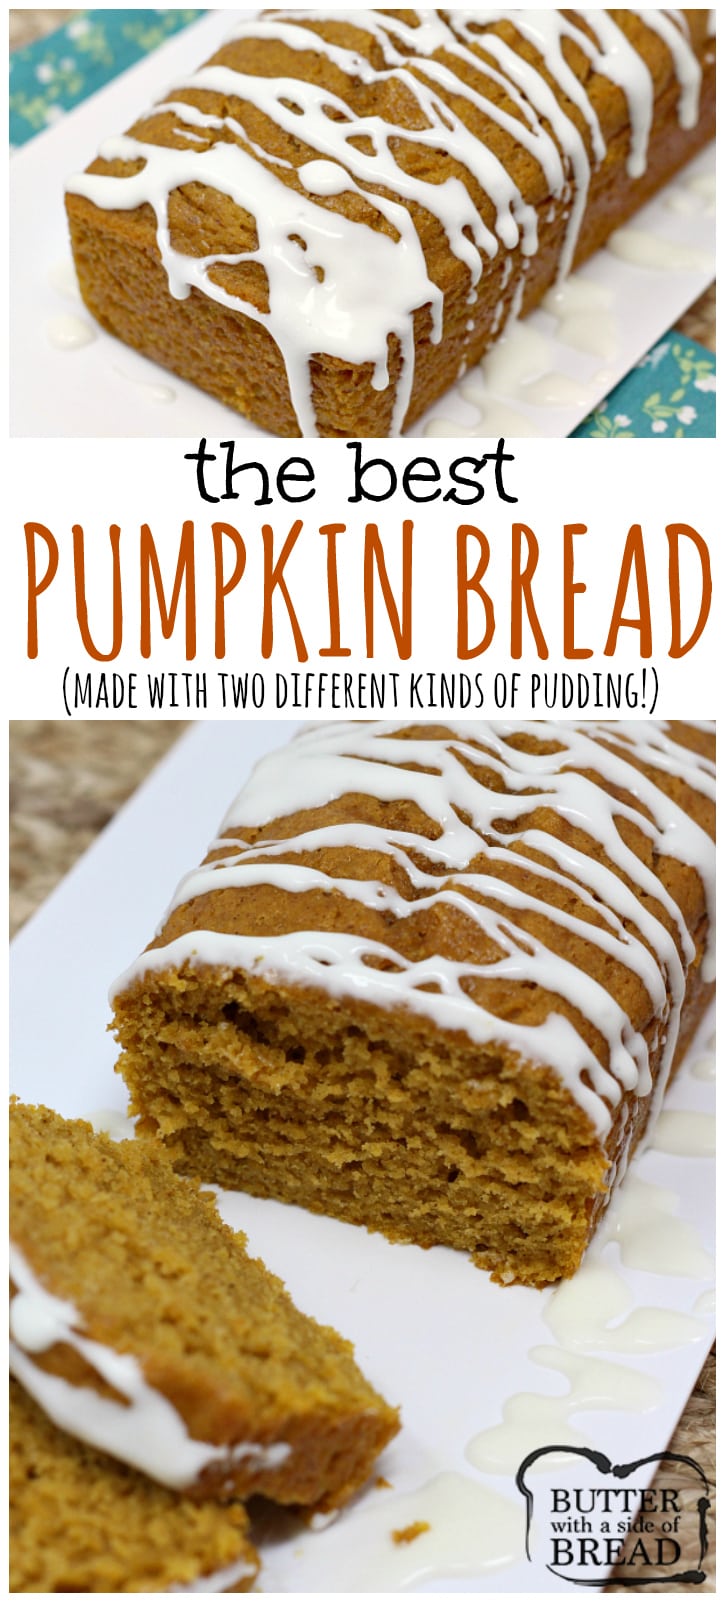 Pumpkin Bread that is soft and delicious because it is made with canned pumpkin, vanilla and butterscotch pudding mixes. This pumpkin bread recipe is also topped with a delicious cream cheese glaze!